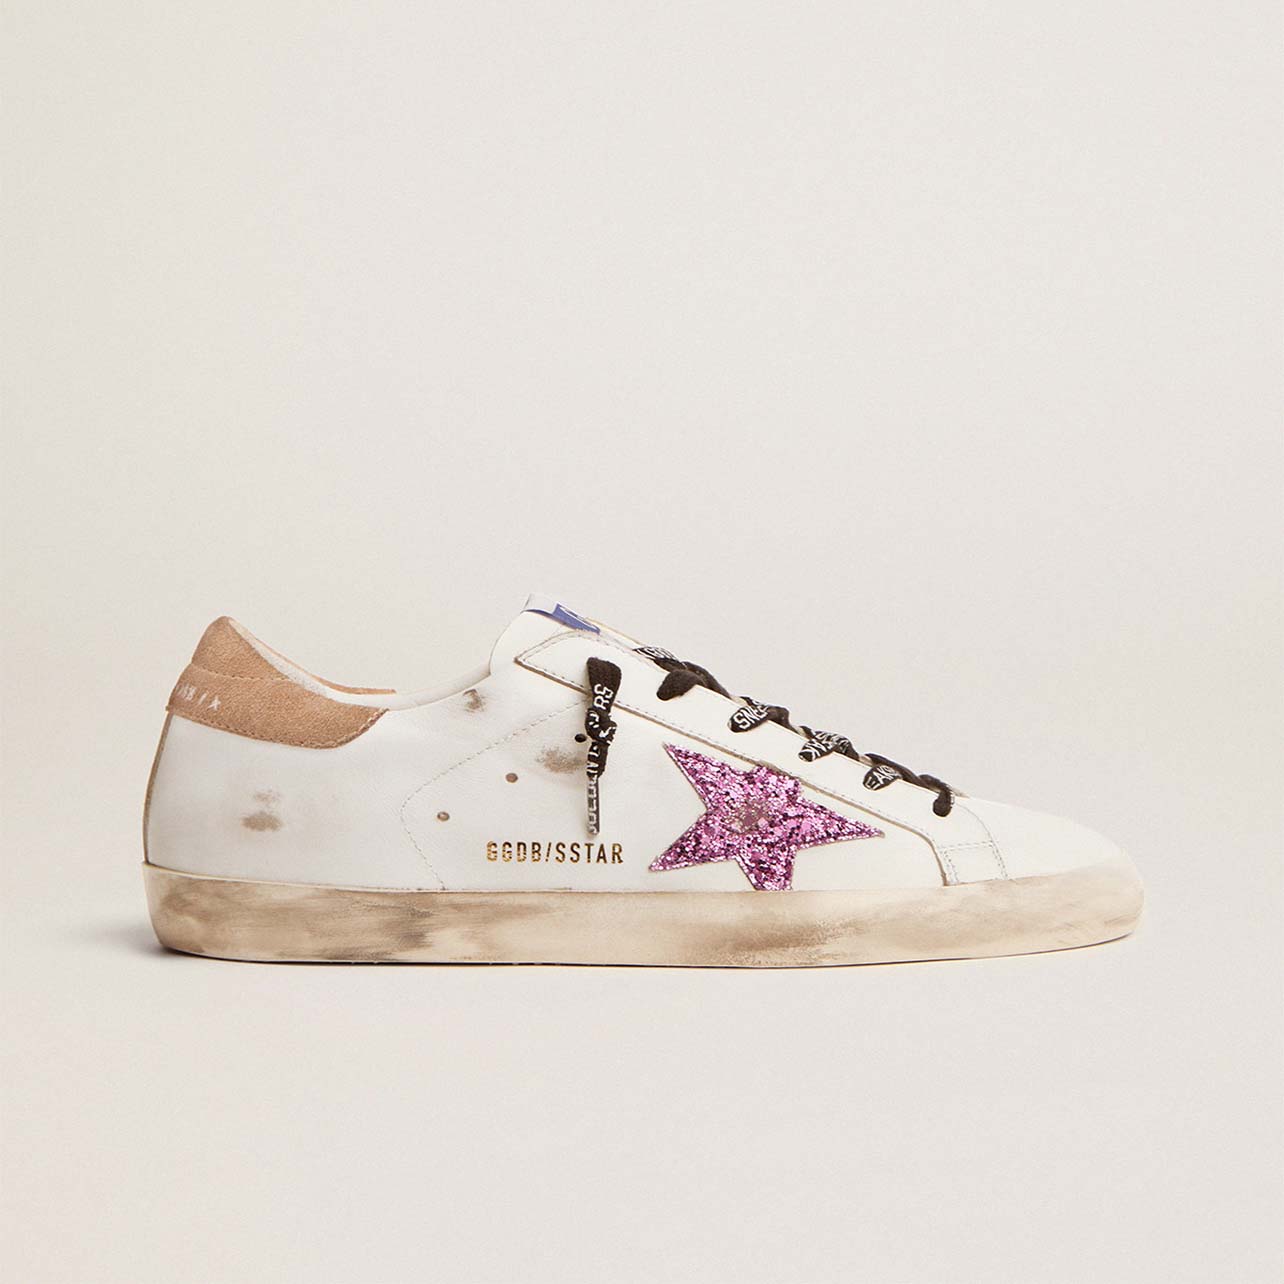 Golden Goose white sneaker with pink star detail and black laces